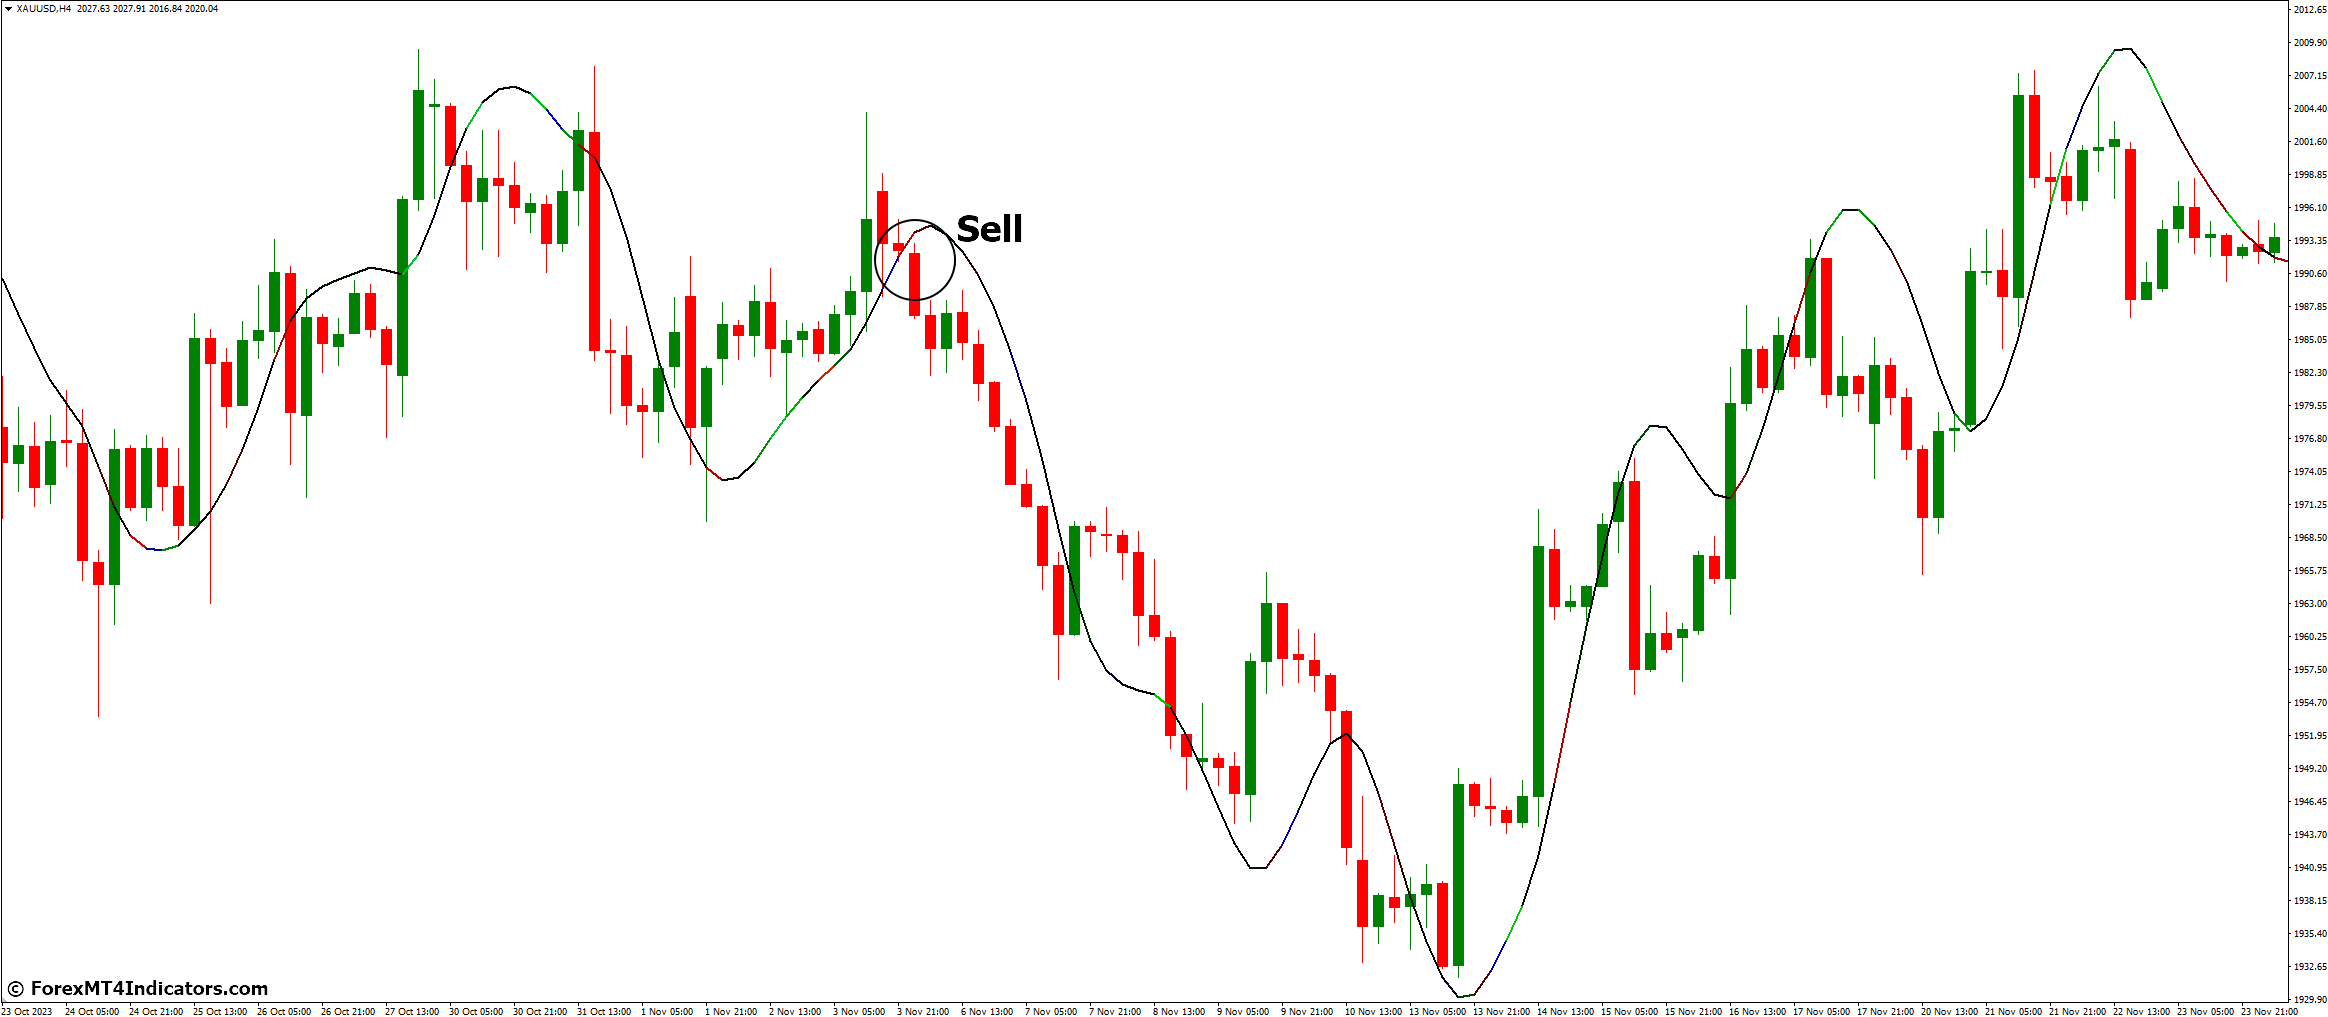 How to Trade with Pretty T3 Indicator - Sell Entry